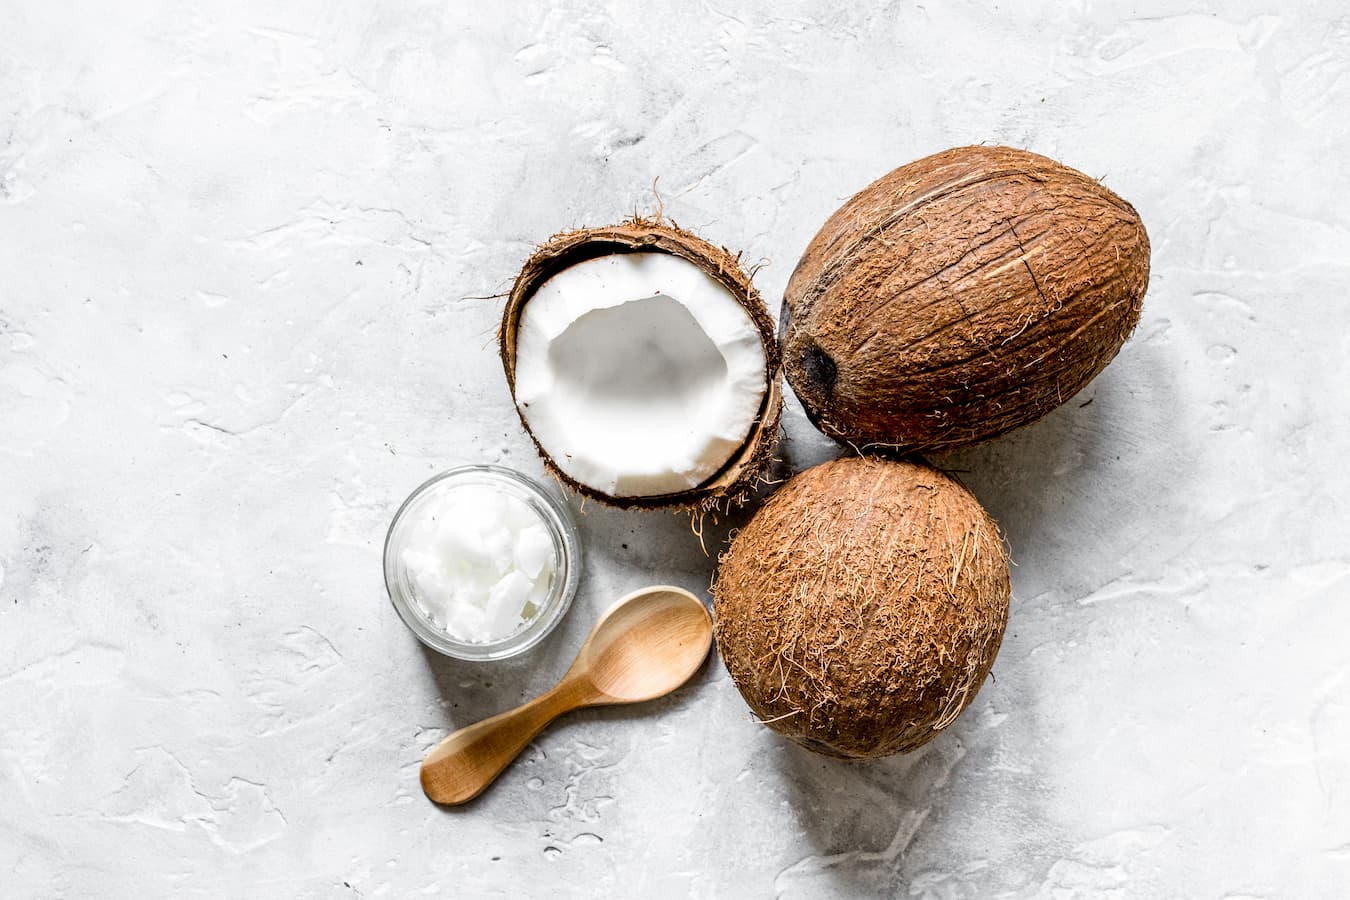 raw coconuts on a countertop weight gain health claims coconut oils body weight loss saturated fat health benefits of coconut weight gain weight loss saturated fat weight loss saturated fat